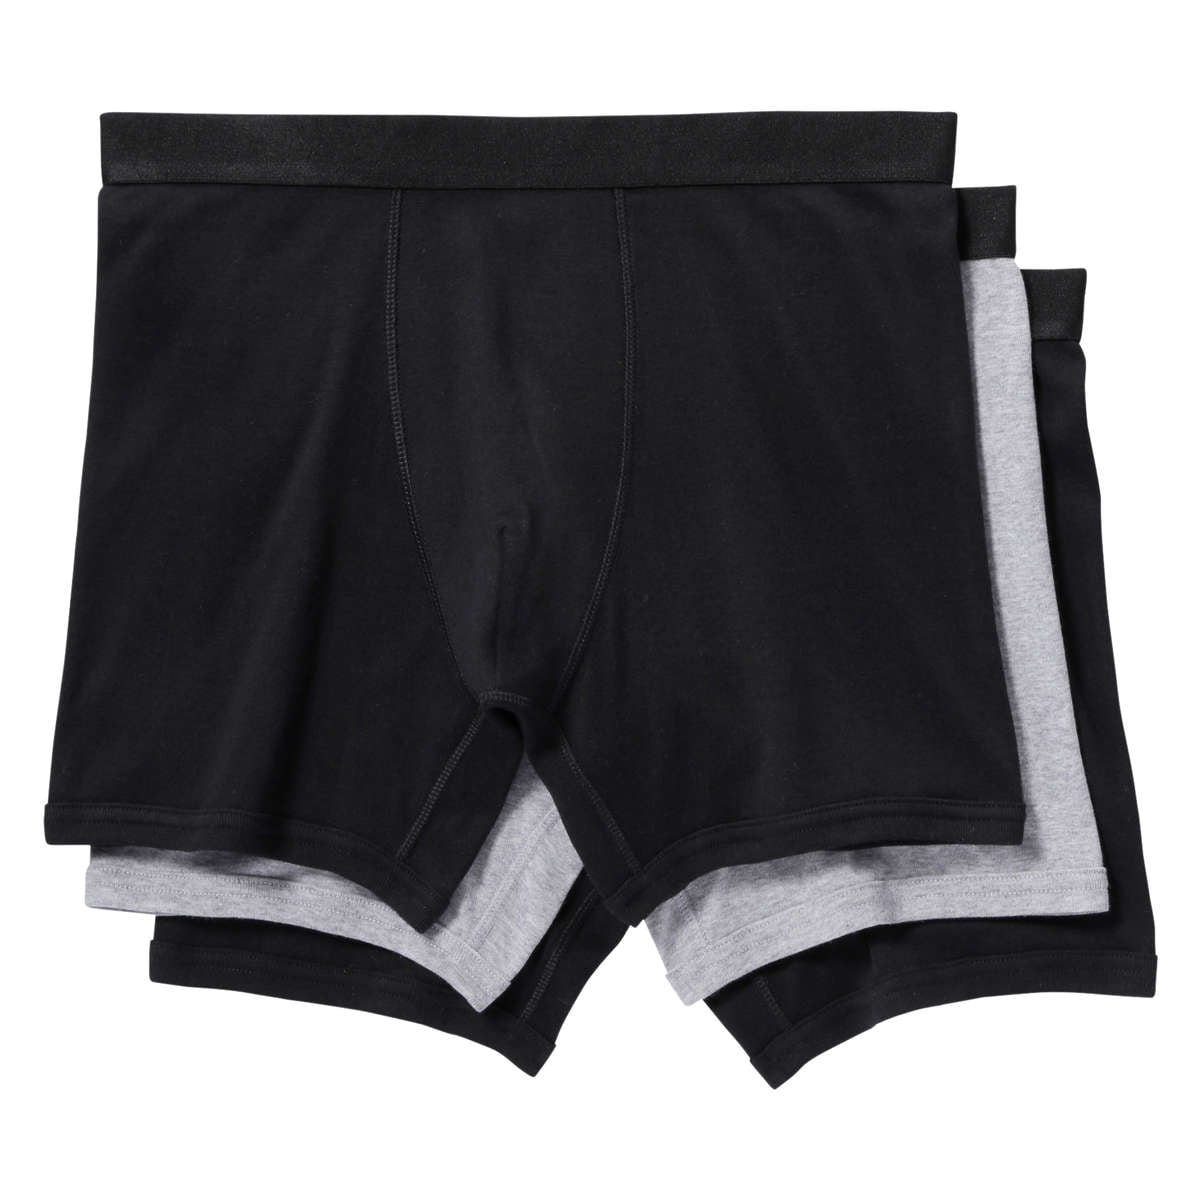 3-PACK JERSEY BOXER BRIEFS - BLACK - COS